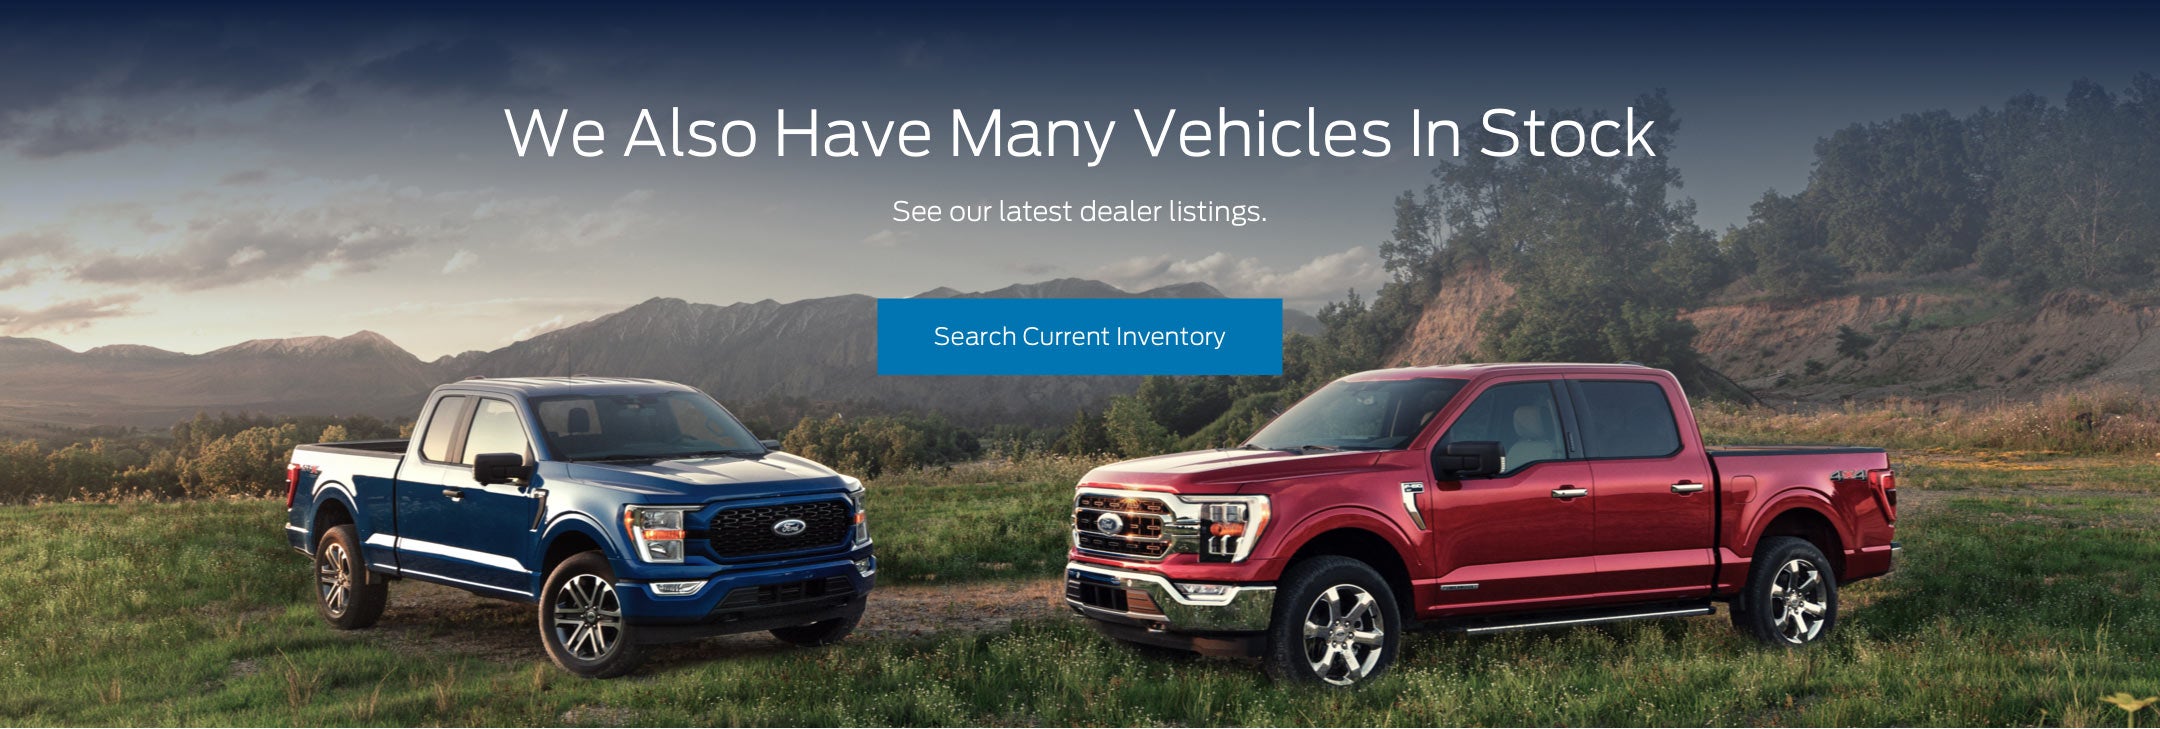 Ford vehicles in stock | Thomasville Ford in Thomasville GA